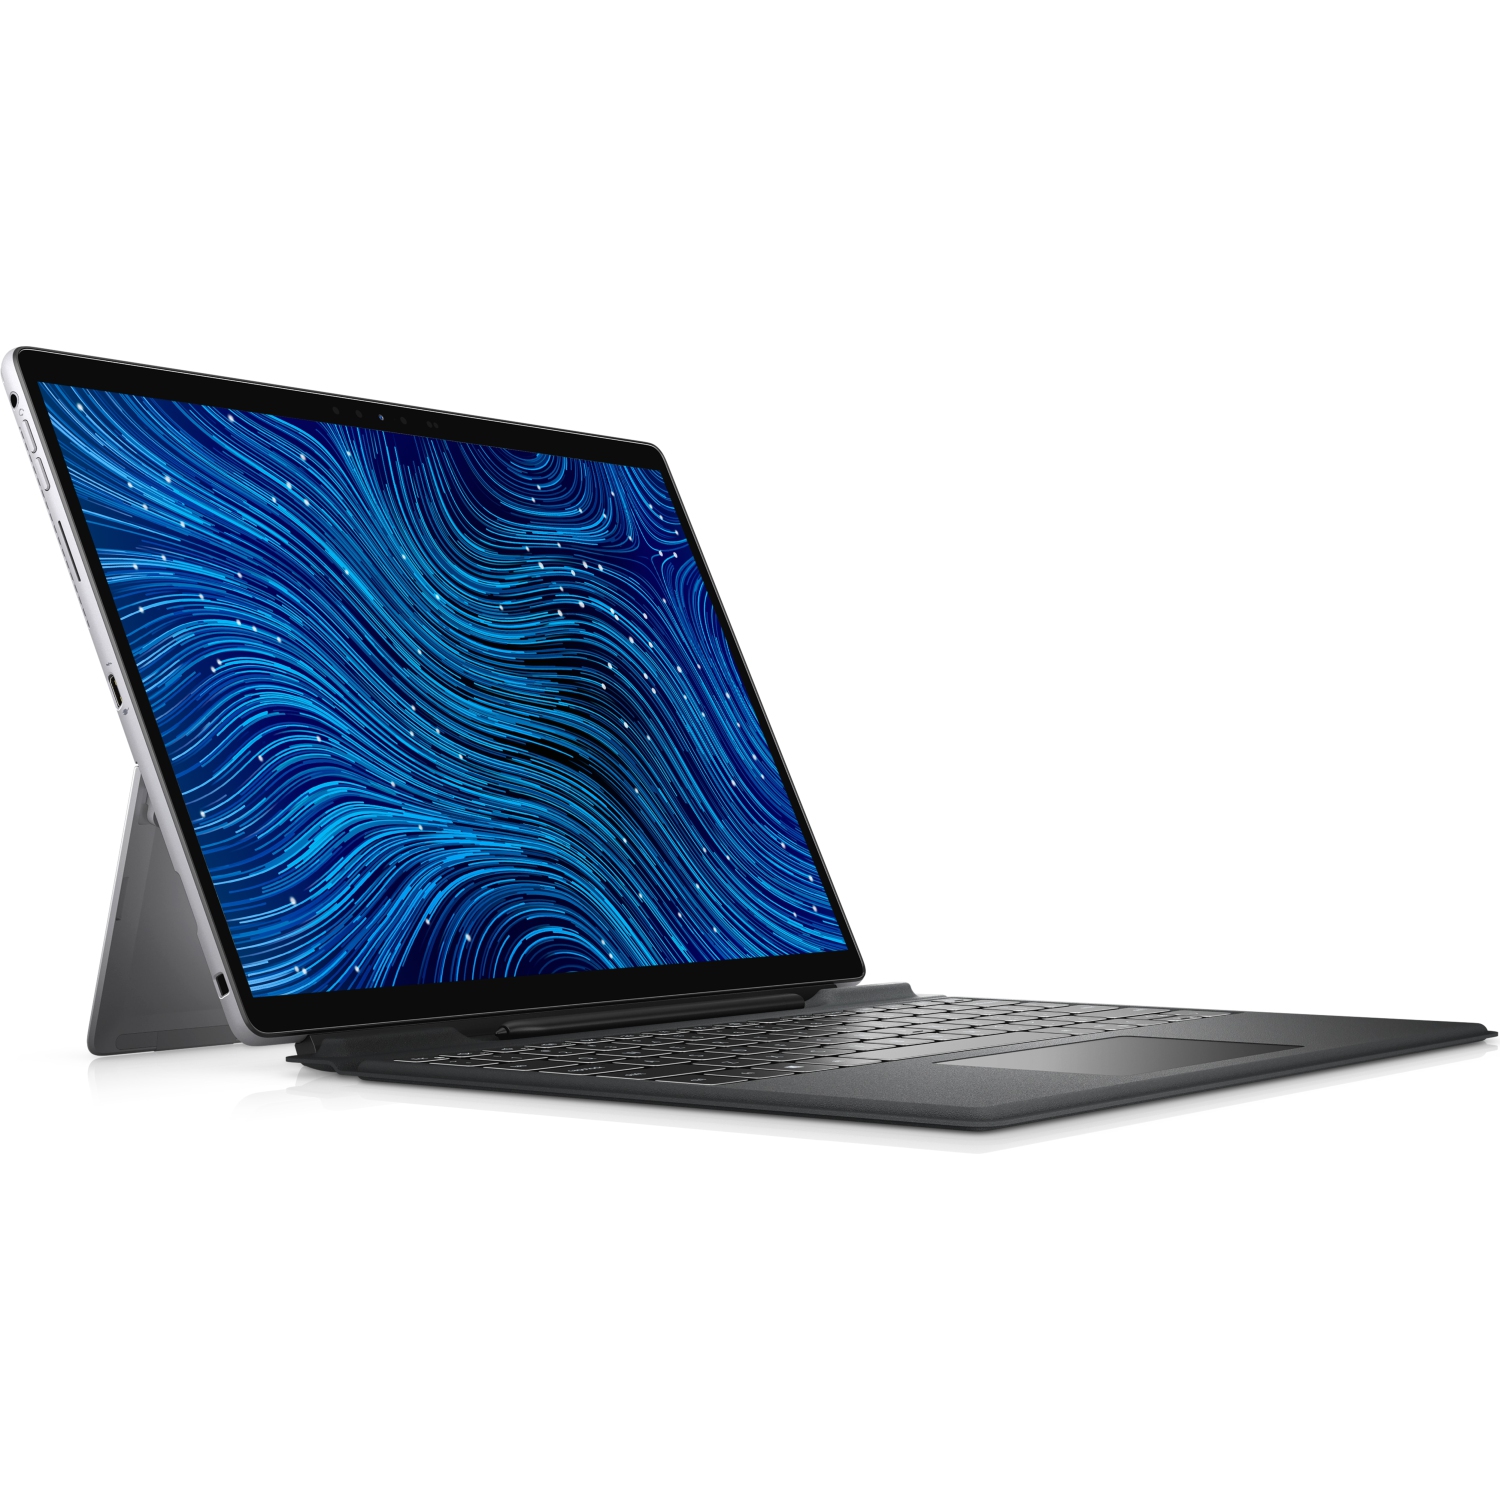 Refurbished (Excellent) - Dell Latitude 7000 7320 Detachable 13 2-in-1 (2021), 13" FHD+ Touch, Core i3, 128GB SSD, 4GB RAM, 2 Cores @ 3.9 GHz, 11th Gen CPU Certified